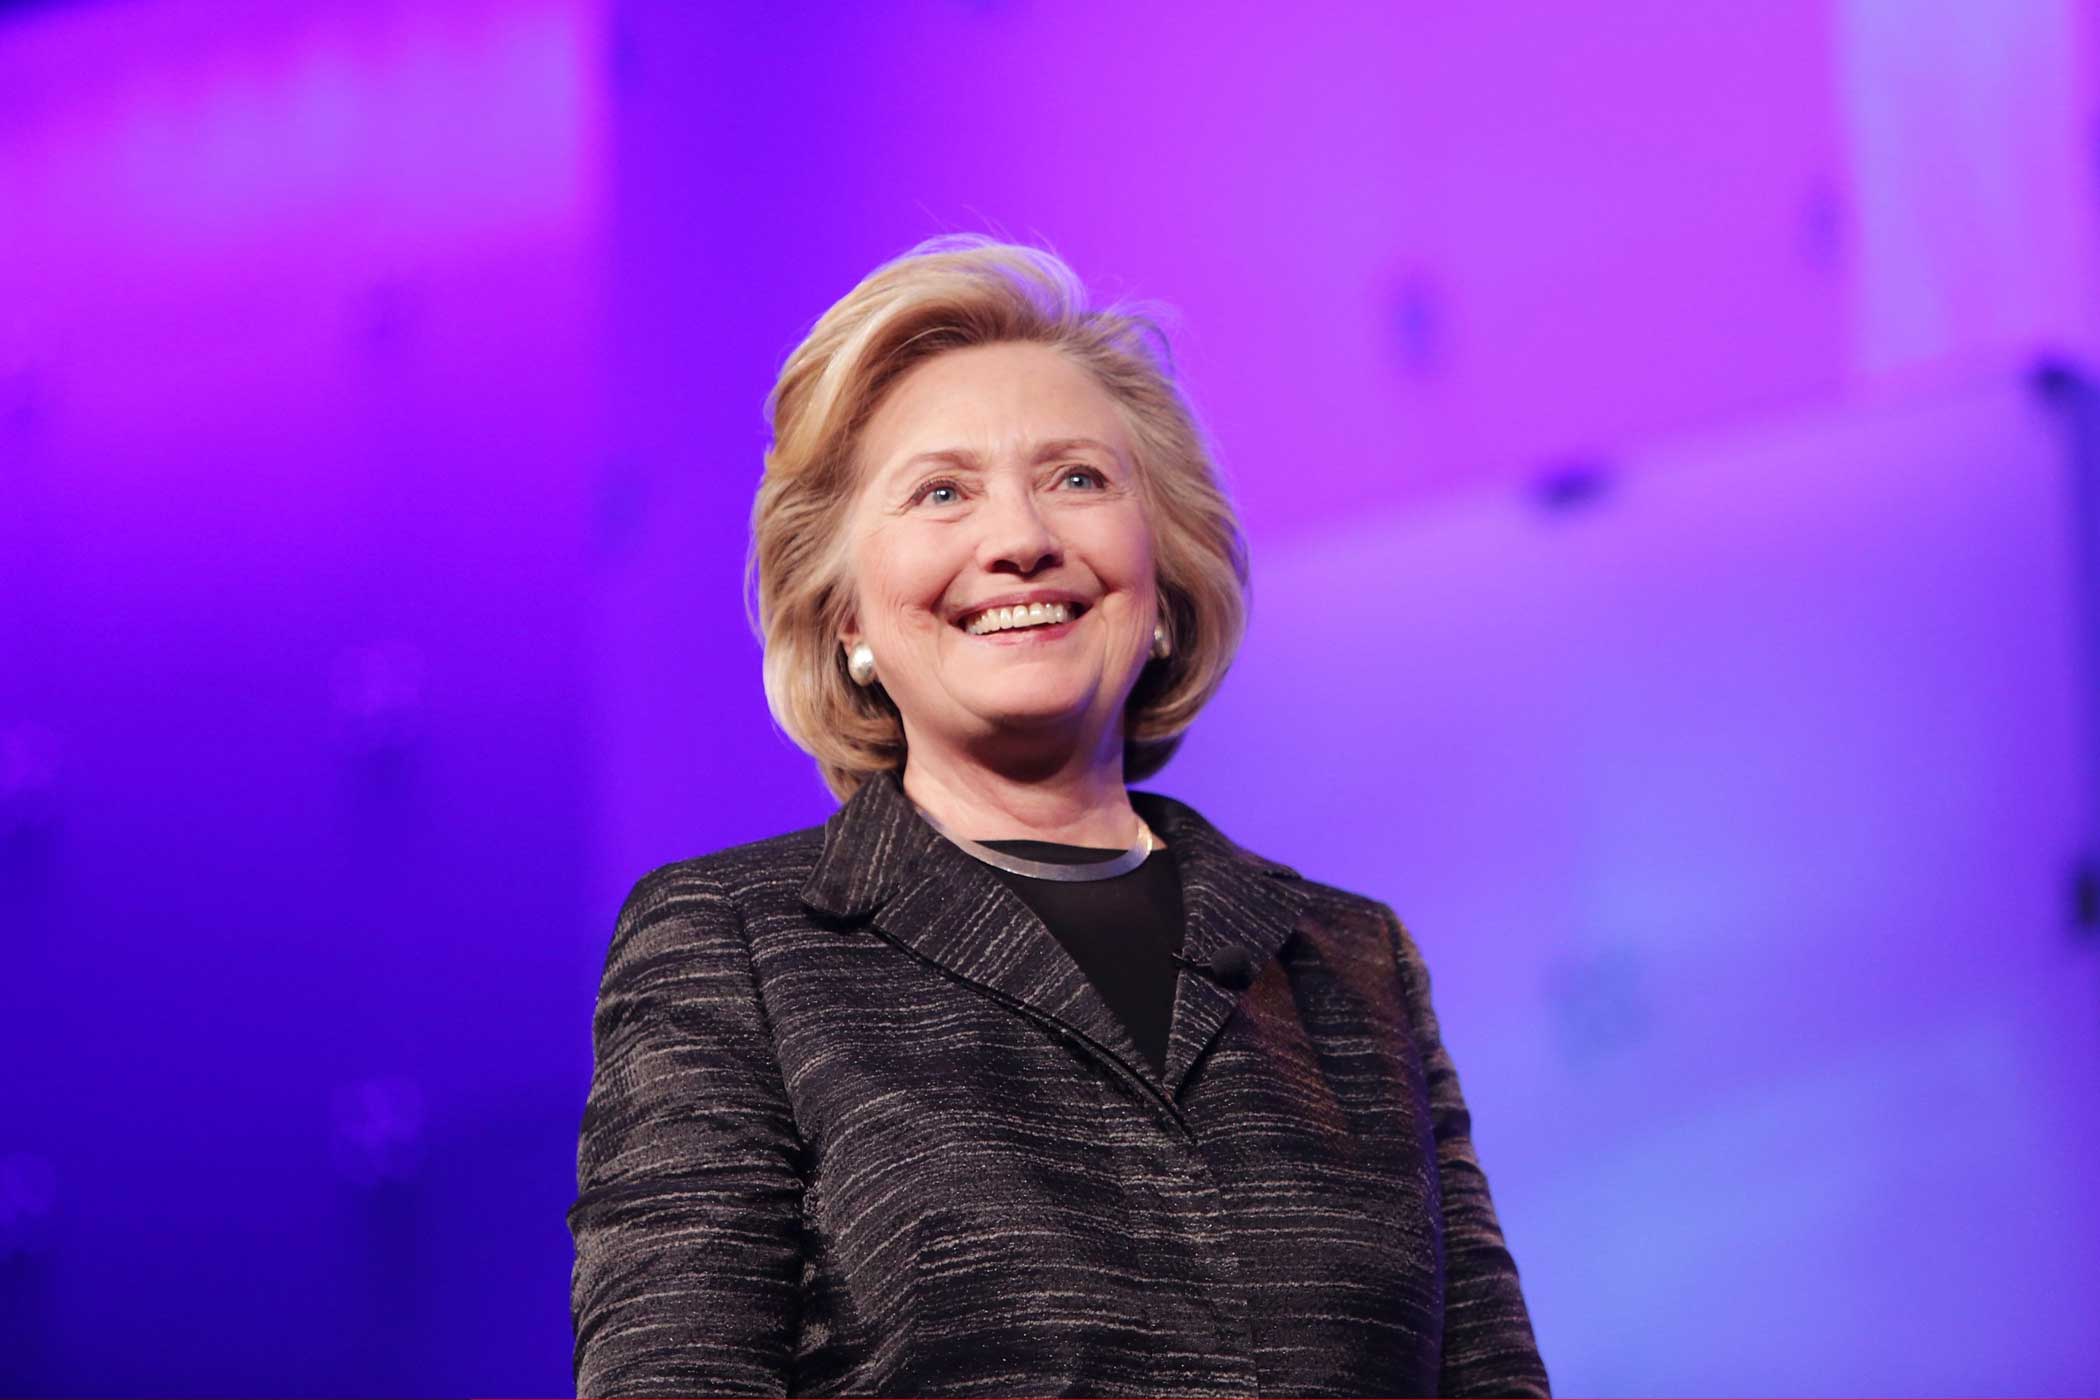 Former United States Secretary of State Hillary Clinton gives the keynote speech during LeadOn:Watermark's Silicon Valley Conference For Women at Santa Clara Convention Center on Feb. 24, 2015 in Santa Clara, California.